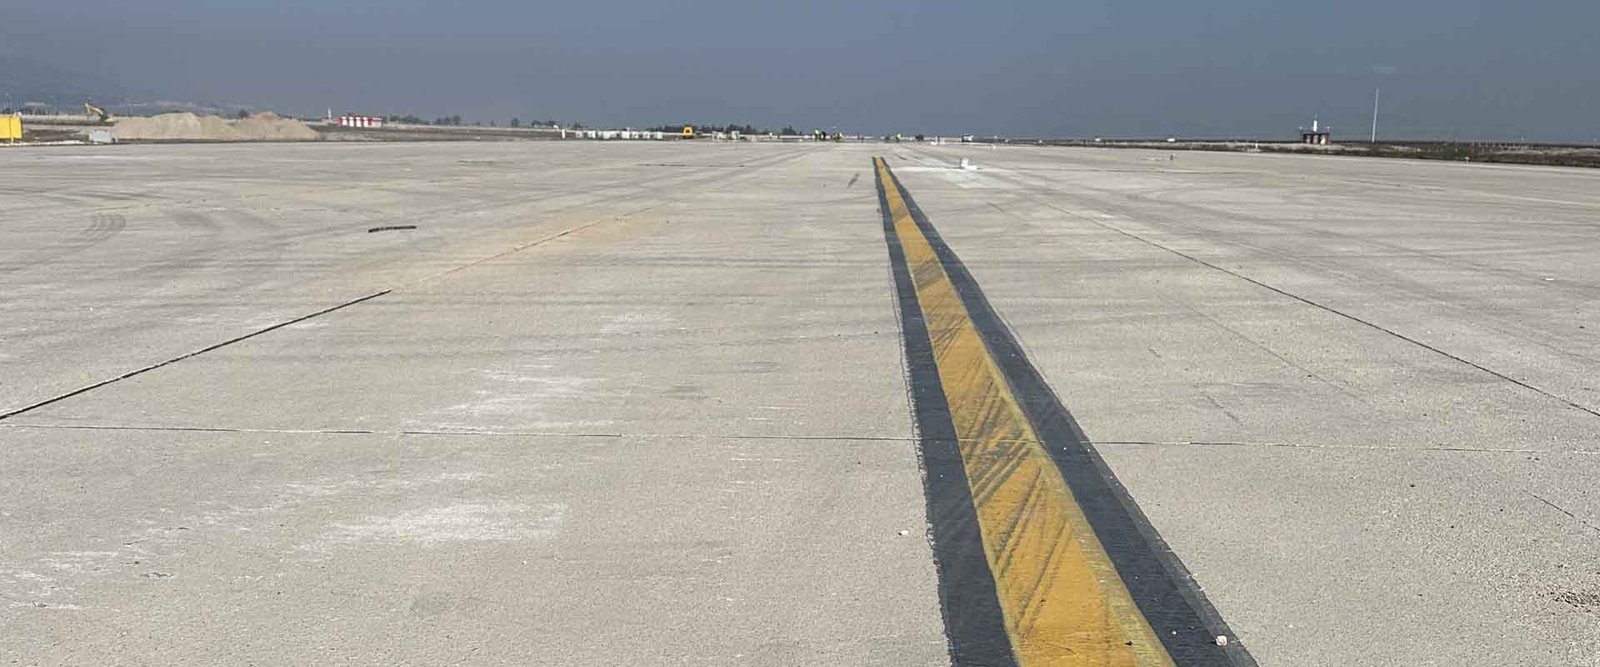 The Runway Of Hatay Airport Restored In 96 Hours By Iga (1)